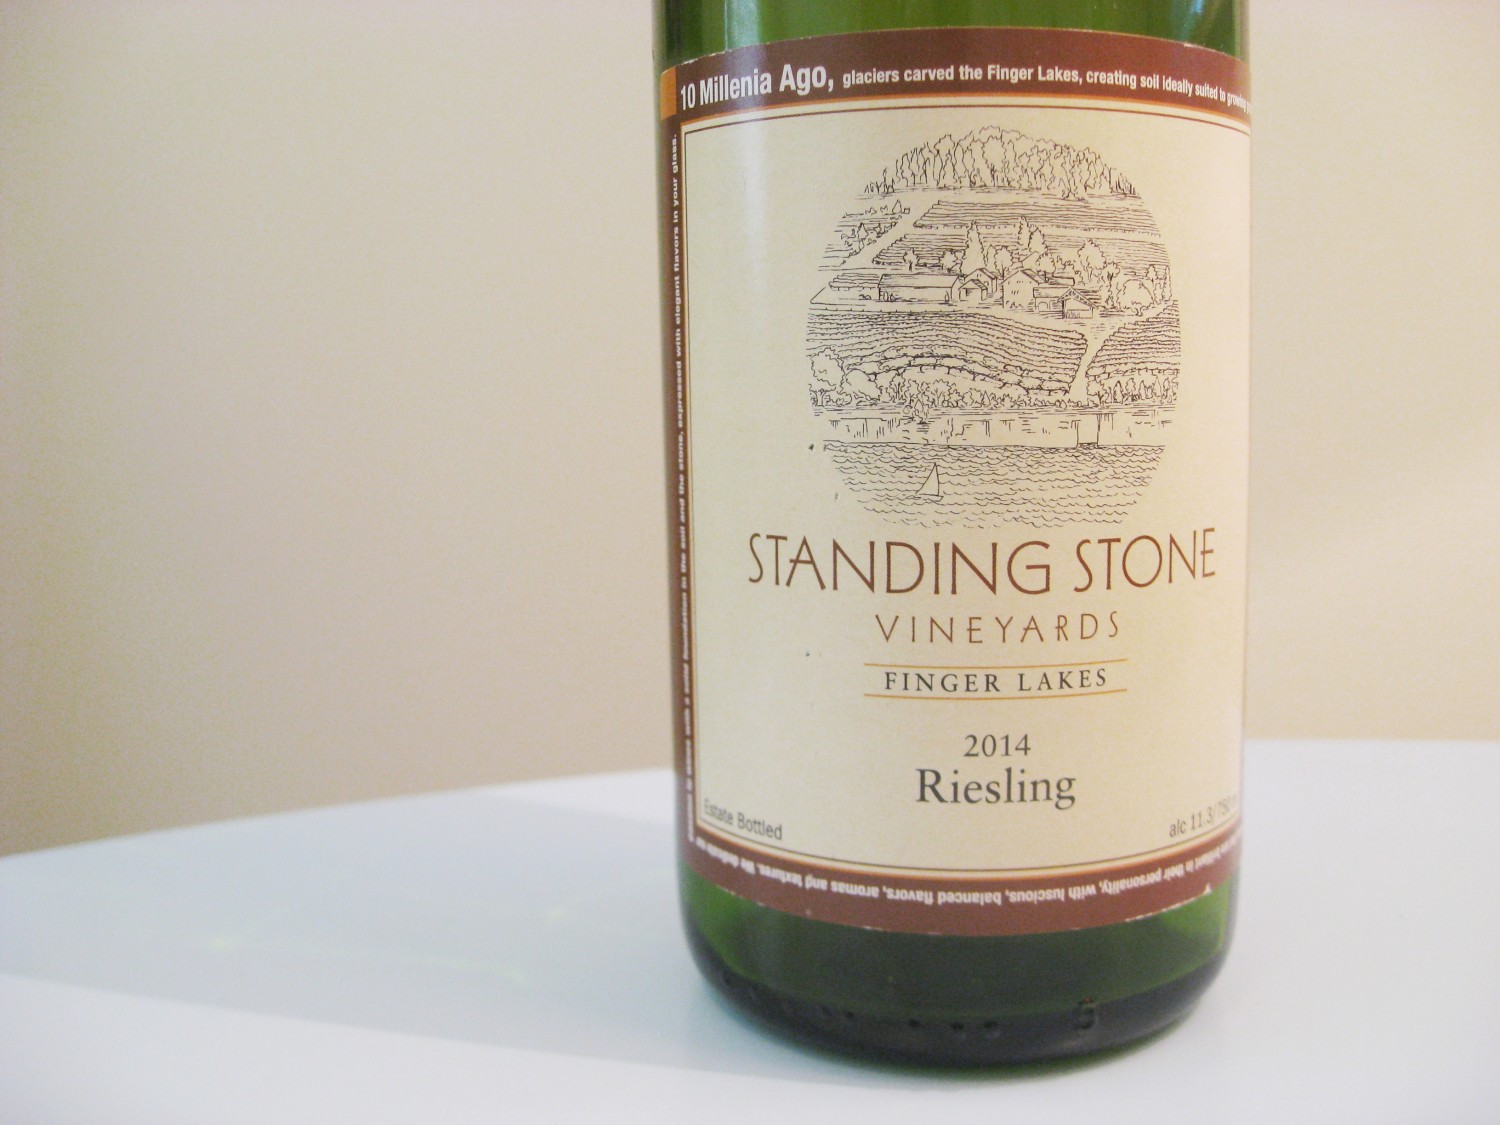 Standing Stone Vineyards, Riesling 2014, Finger Lakes, New York, Wine Casual